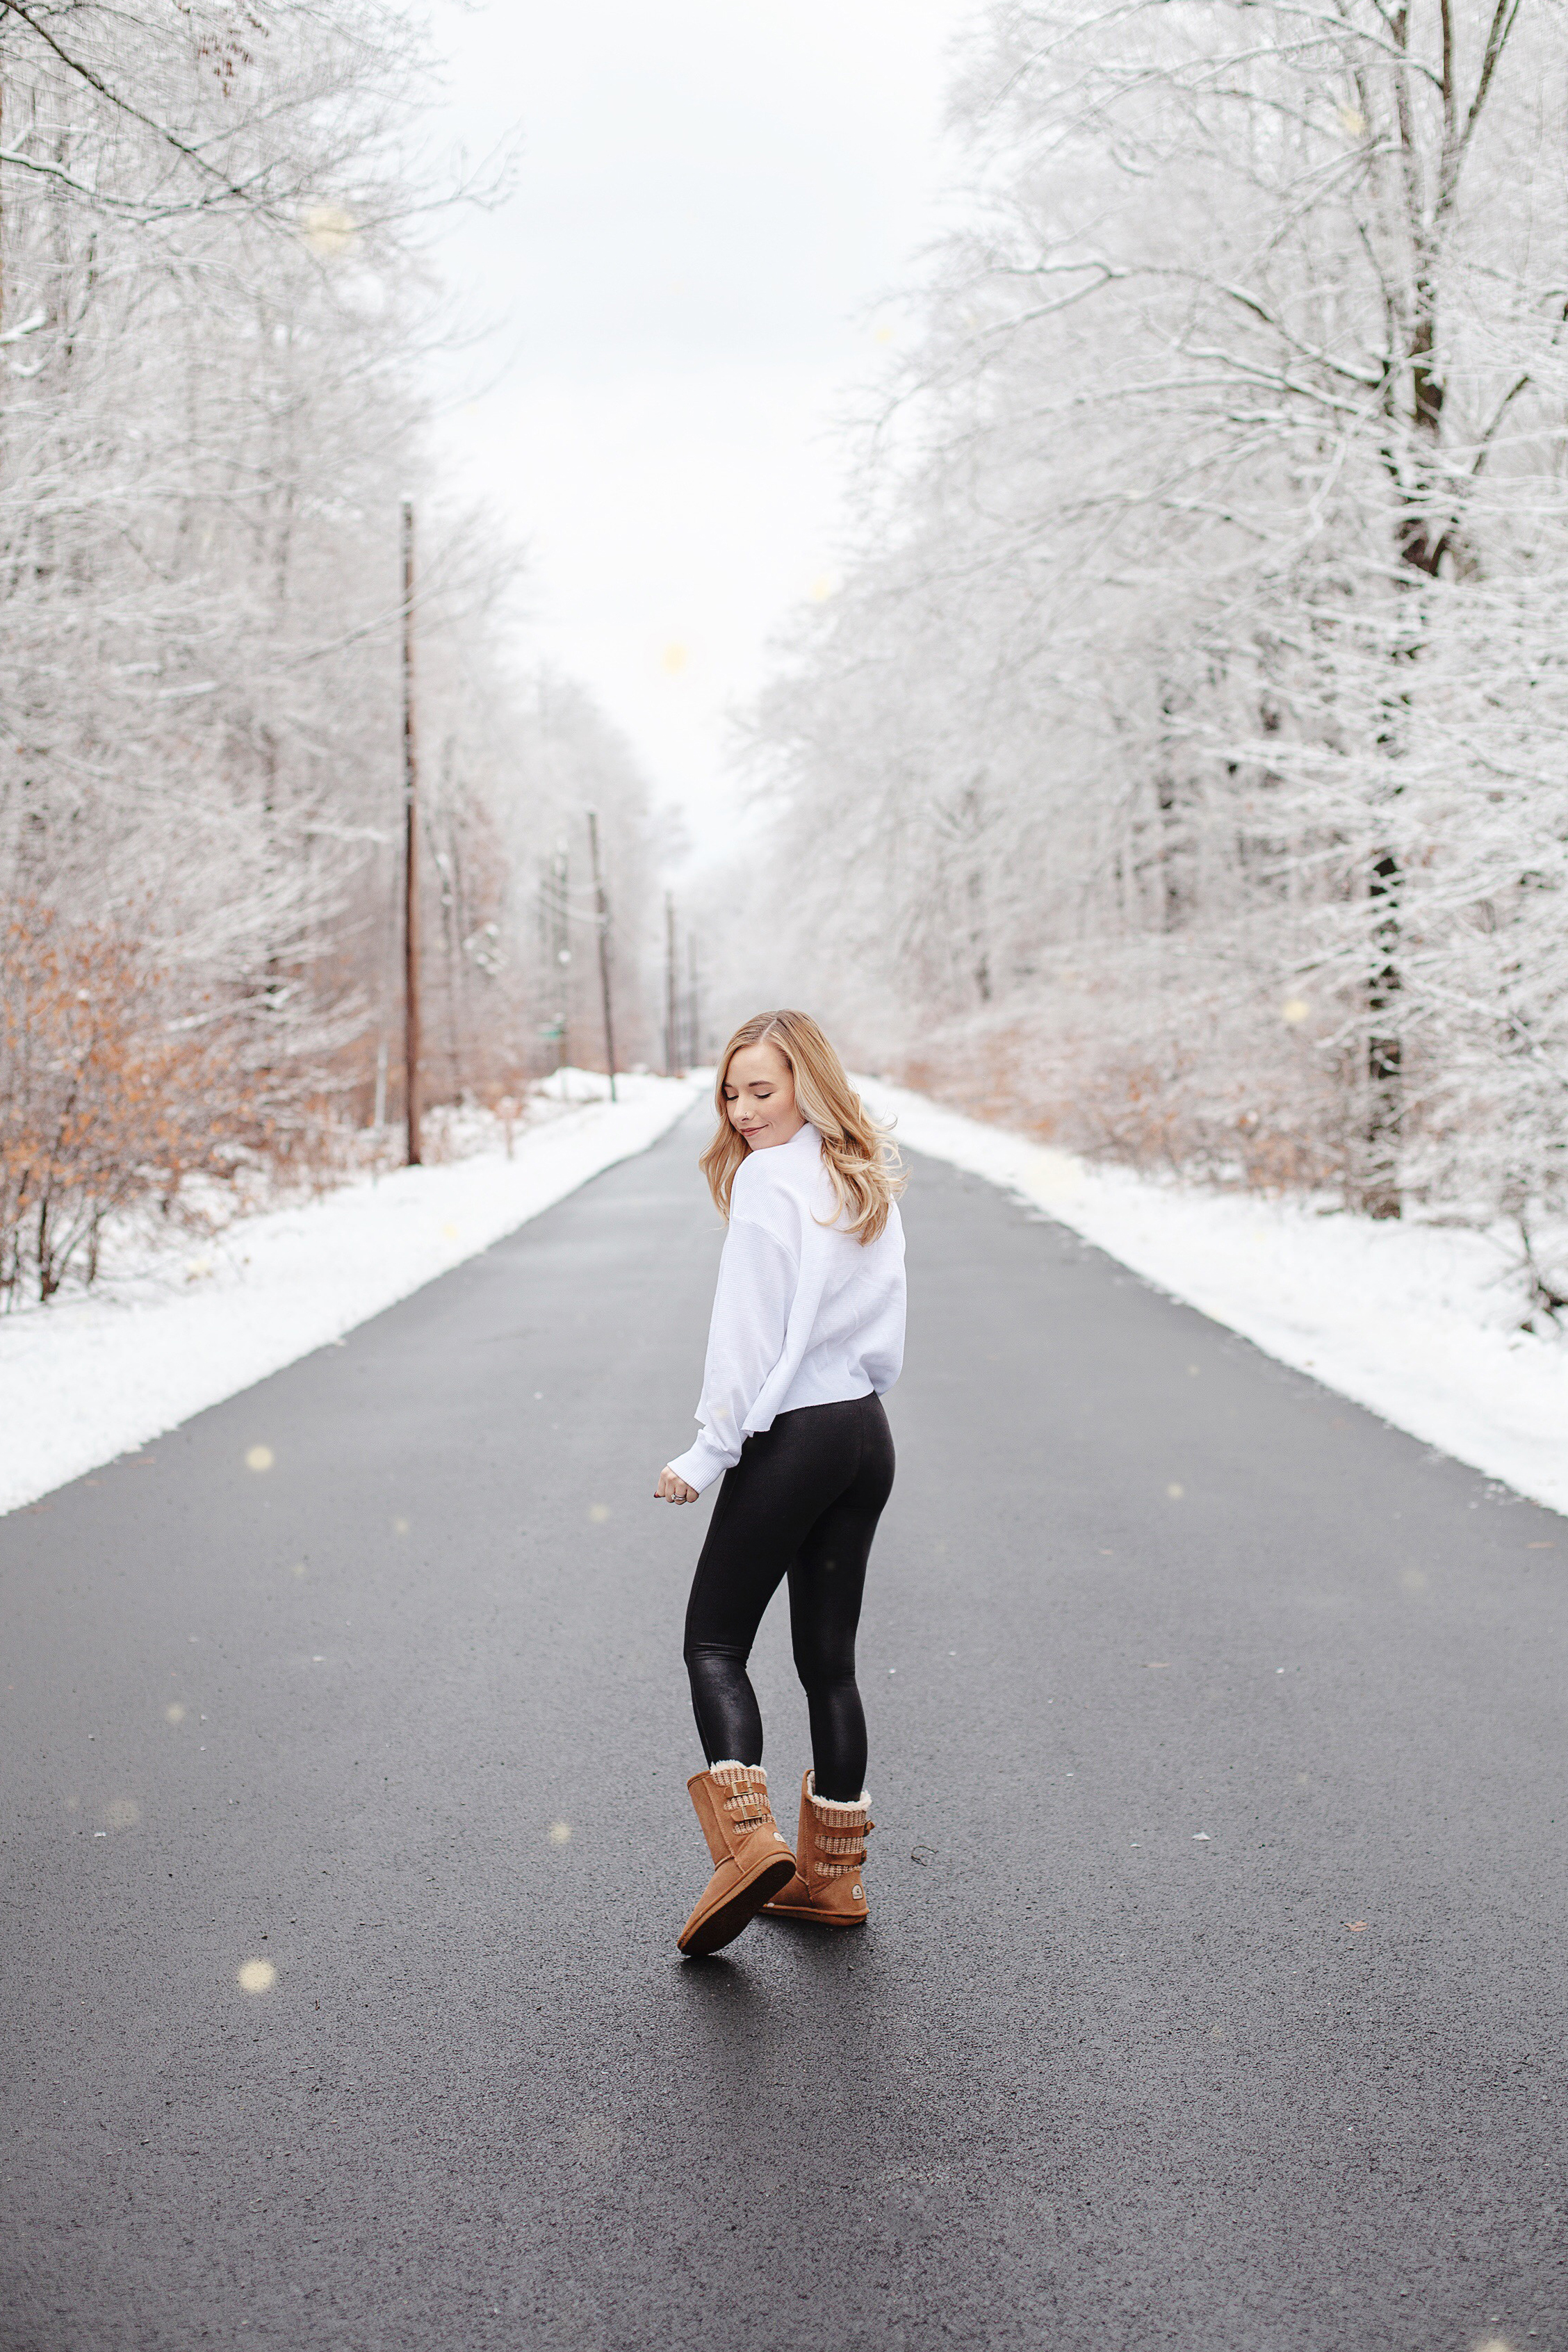 SPANX - Dashing through the snow, in outfits that totally